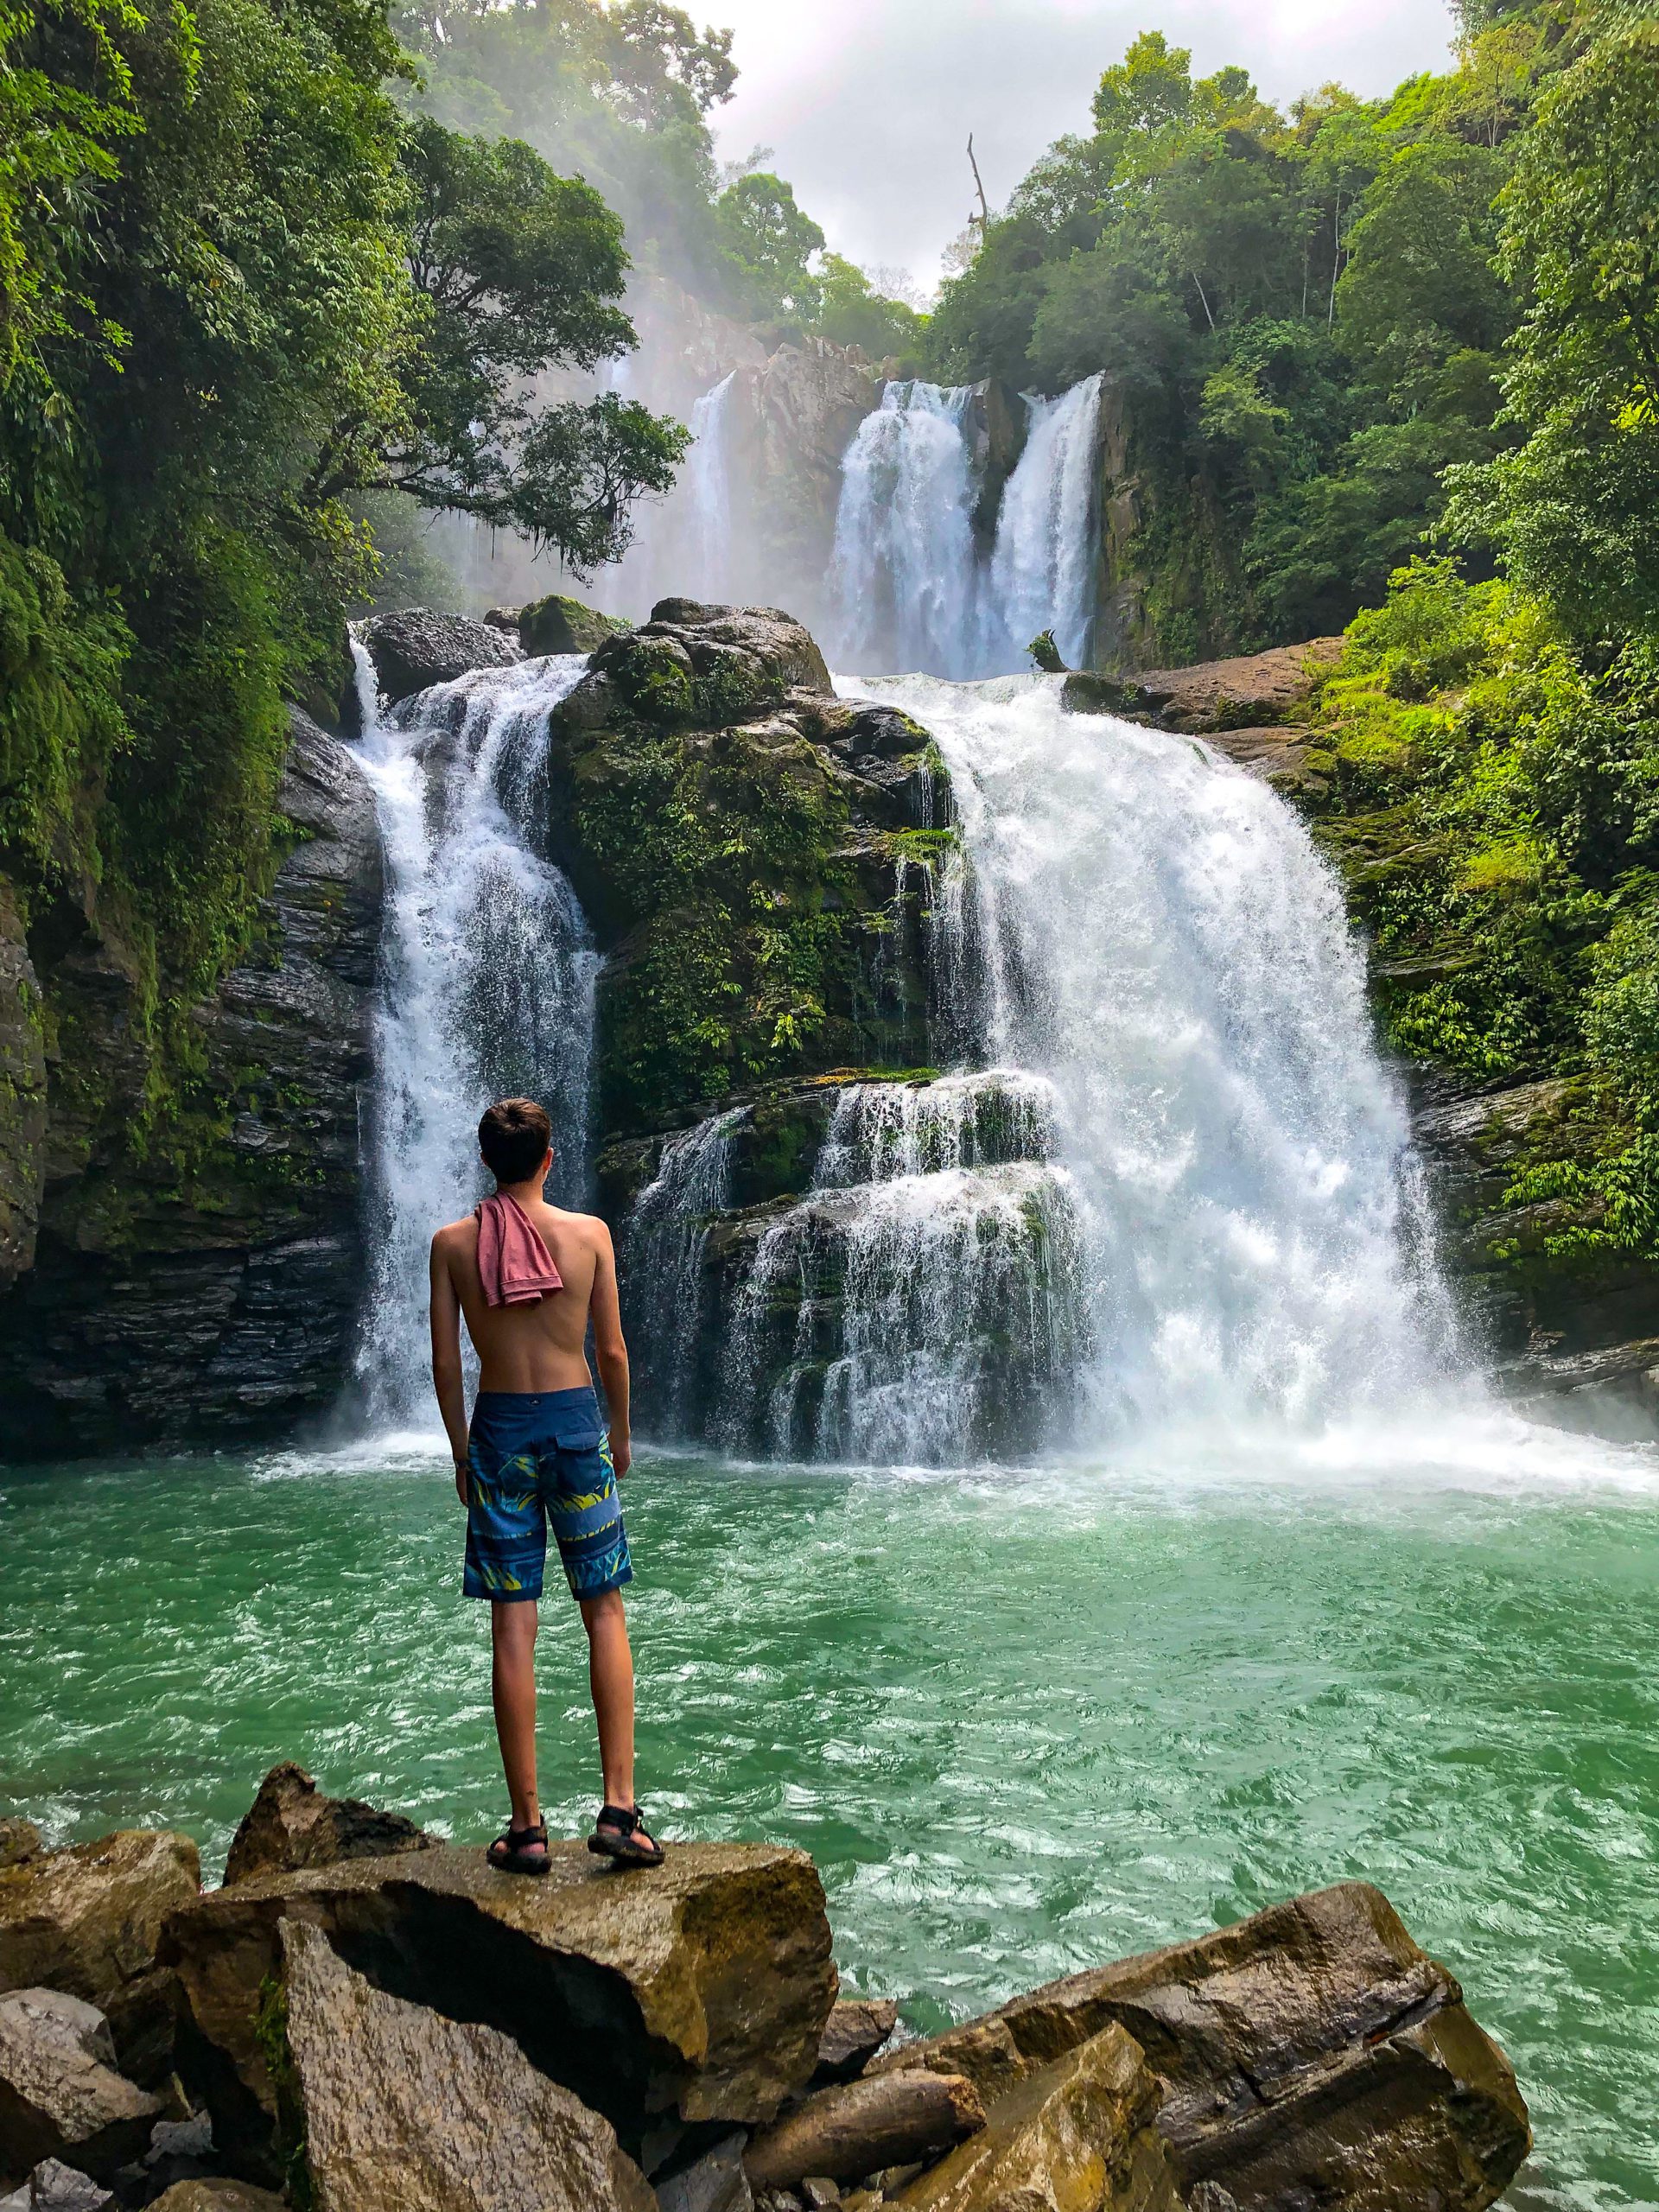 Nauyaca Falls - a must see during your 10 days in Costa Rica